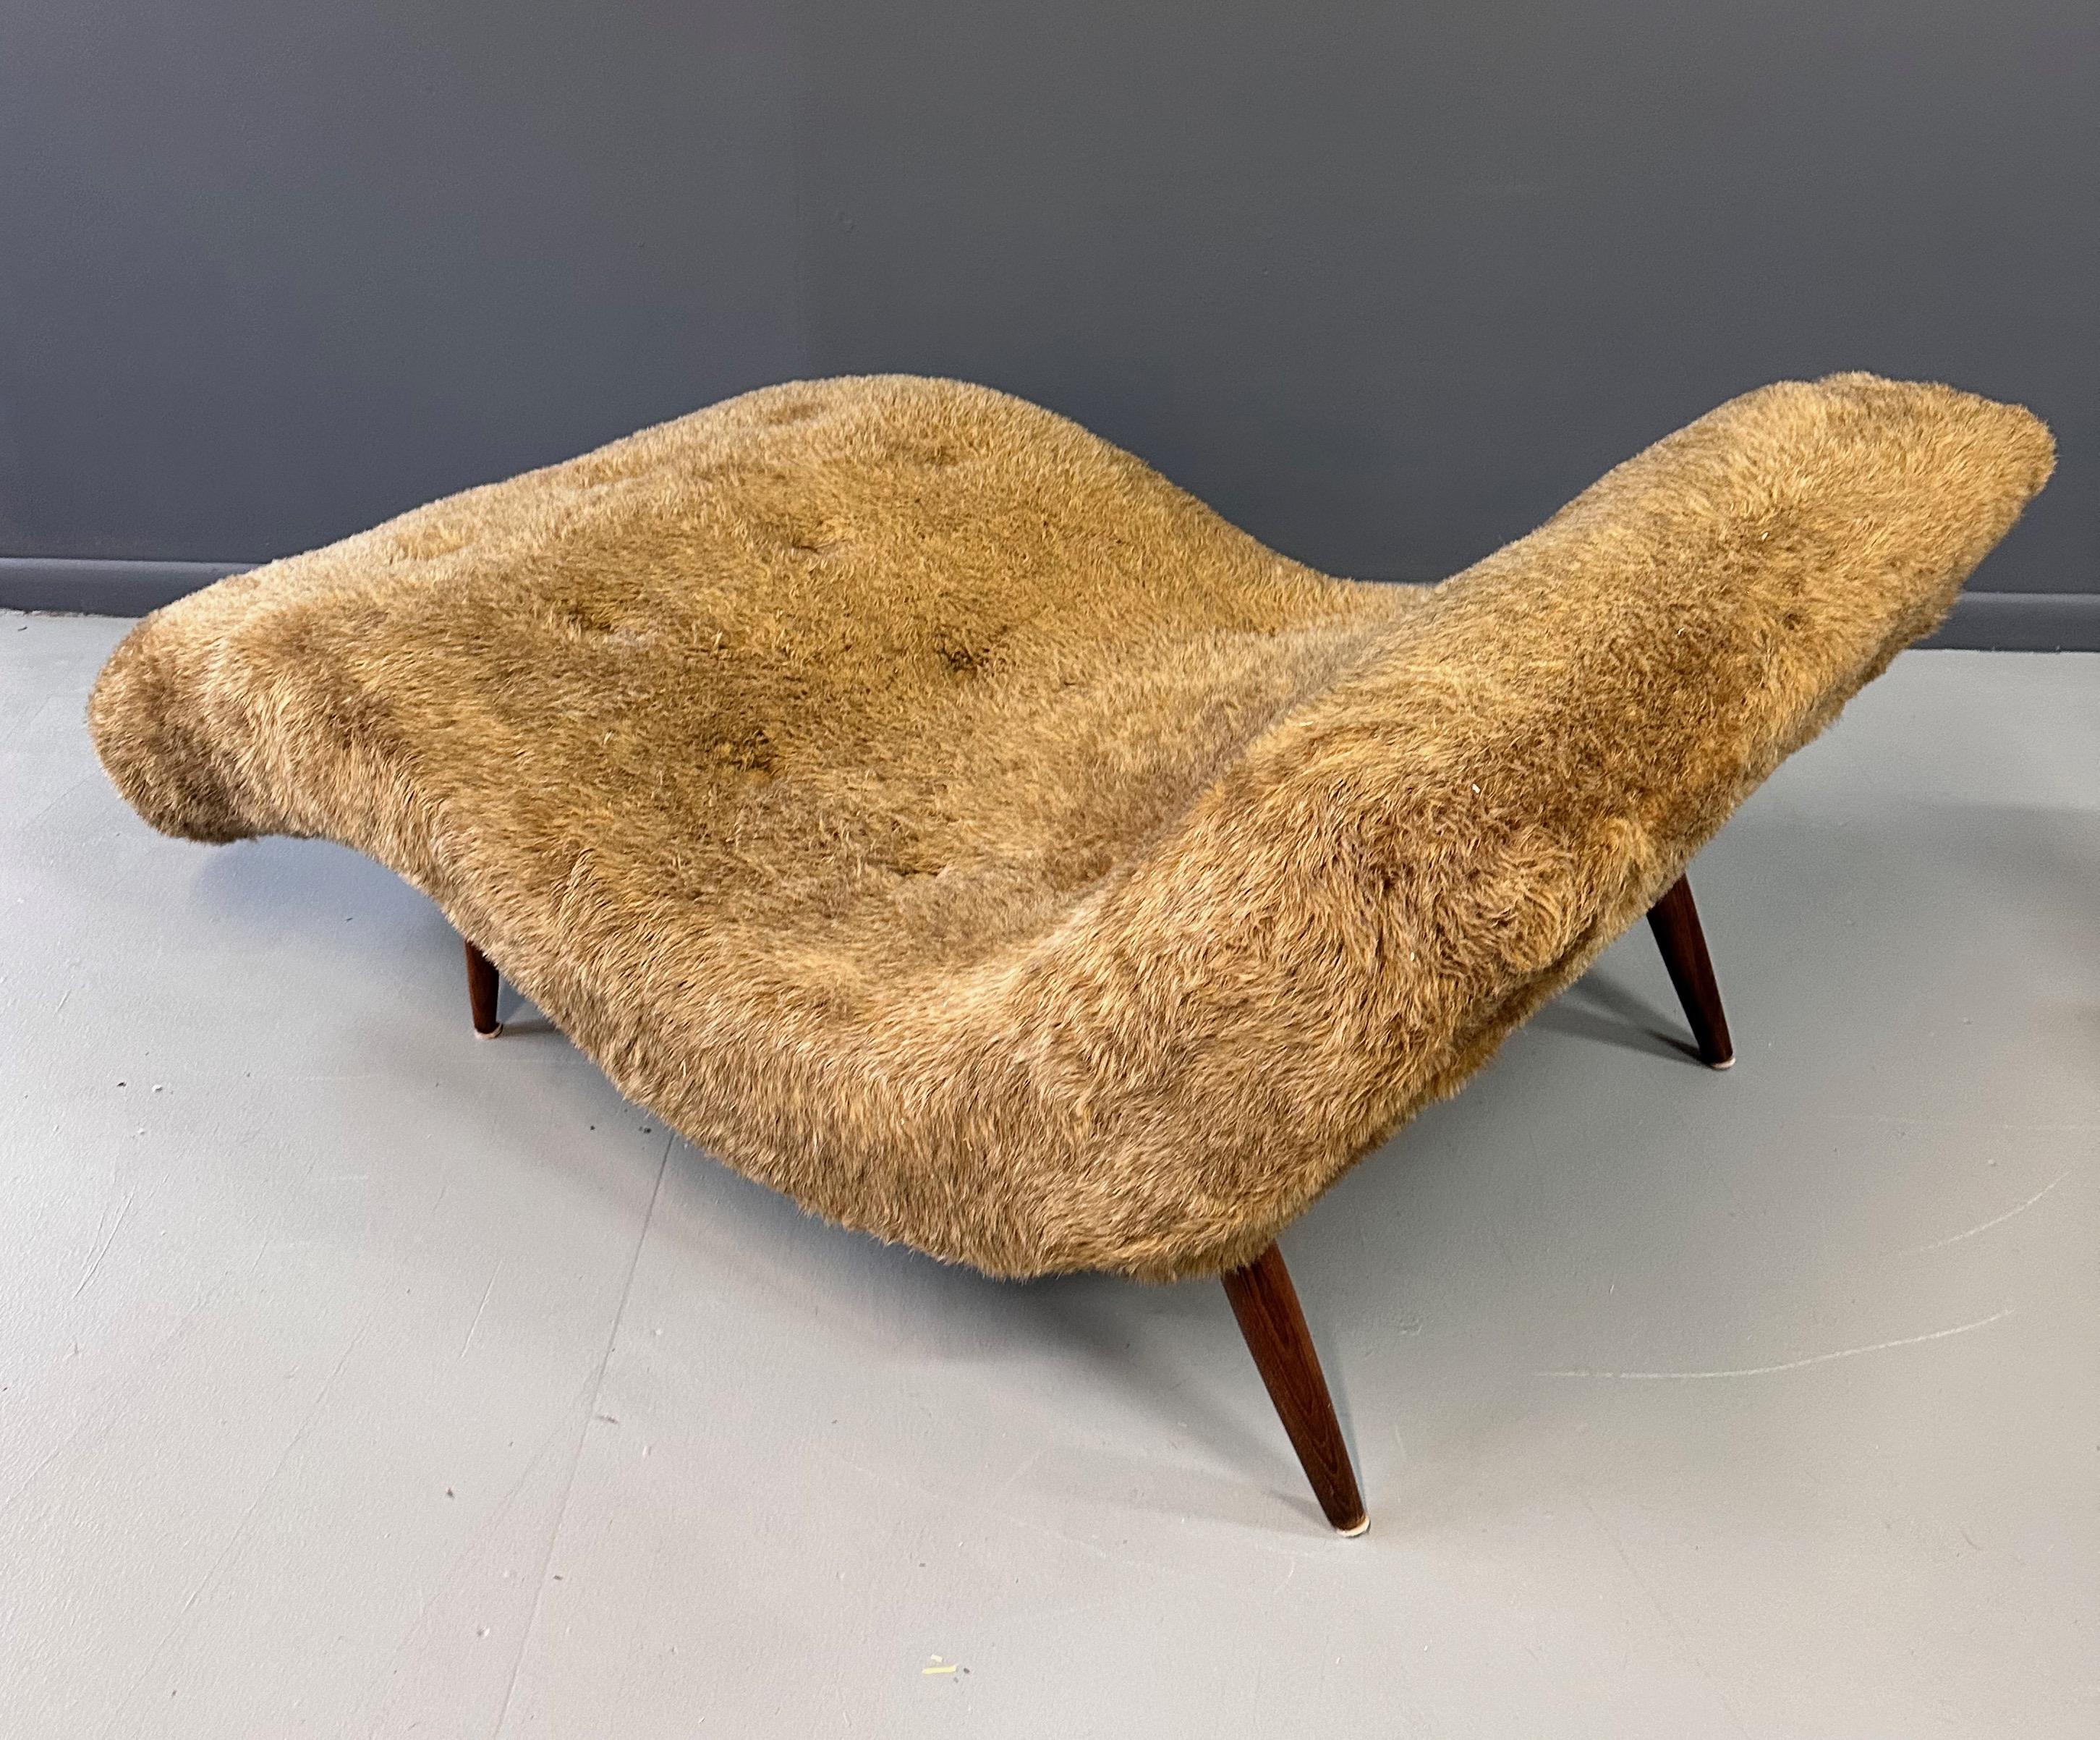 Adrian Pearsall style louge chair in a wonderful wave form with slender oak legs. Generously proportioned, this chair cozily holds two! The chair is presently upholstered in a fun faux fur that is in good shape. 

We are very happy to upholster this